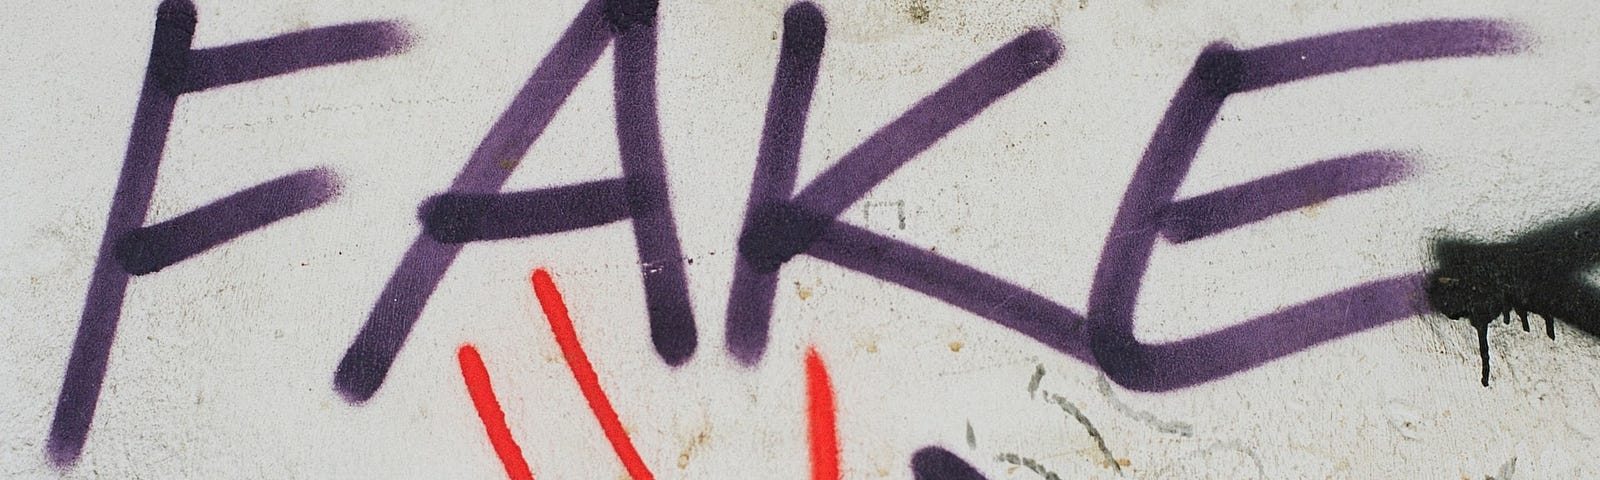 IMAGE: A graffiti in a white wall with the word FAKE in purple